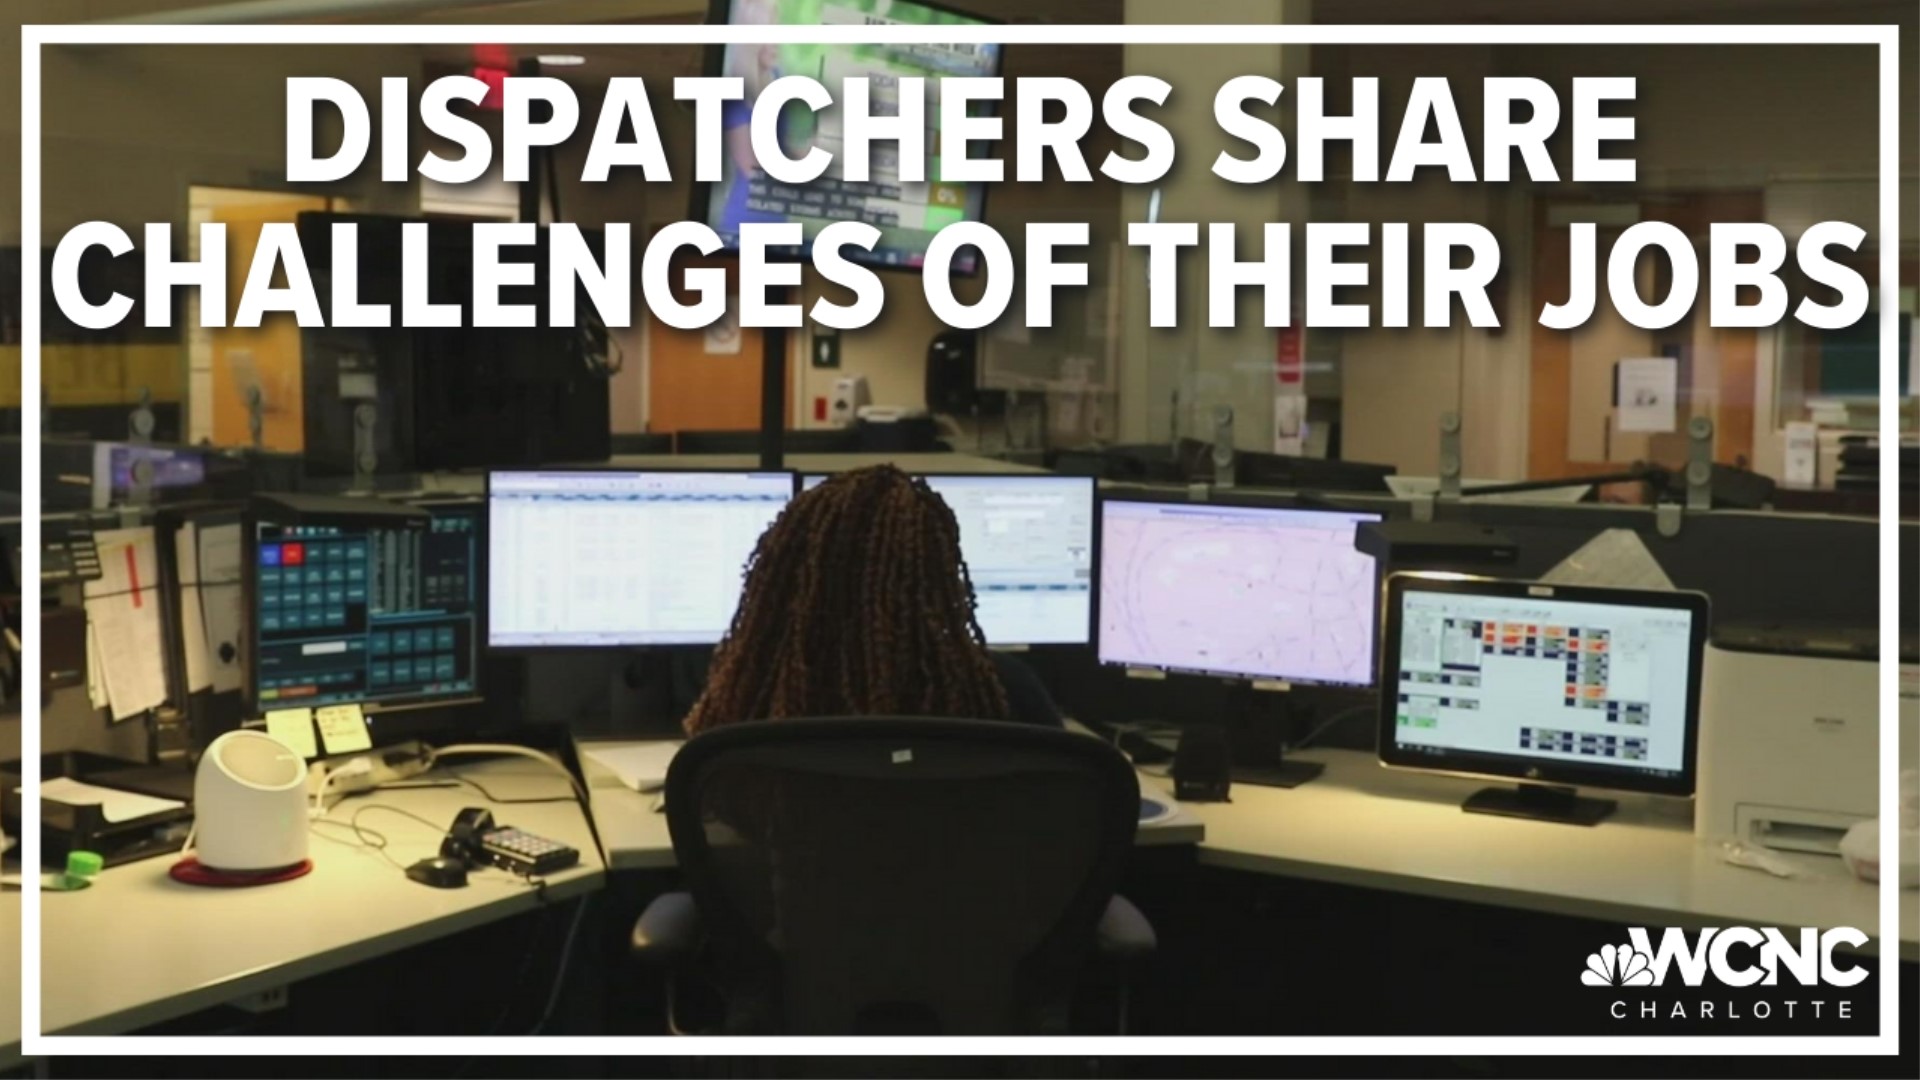 The week of April 11, 2022, is National Public Safety Telecommunicators Week.